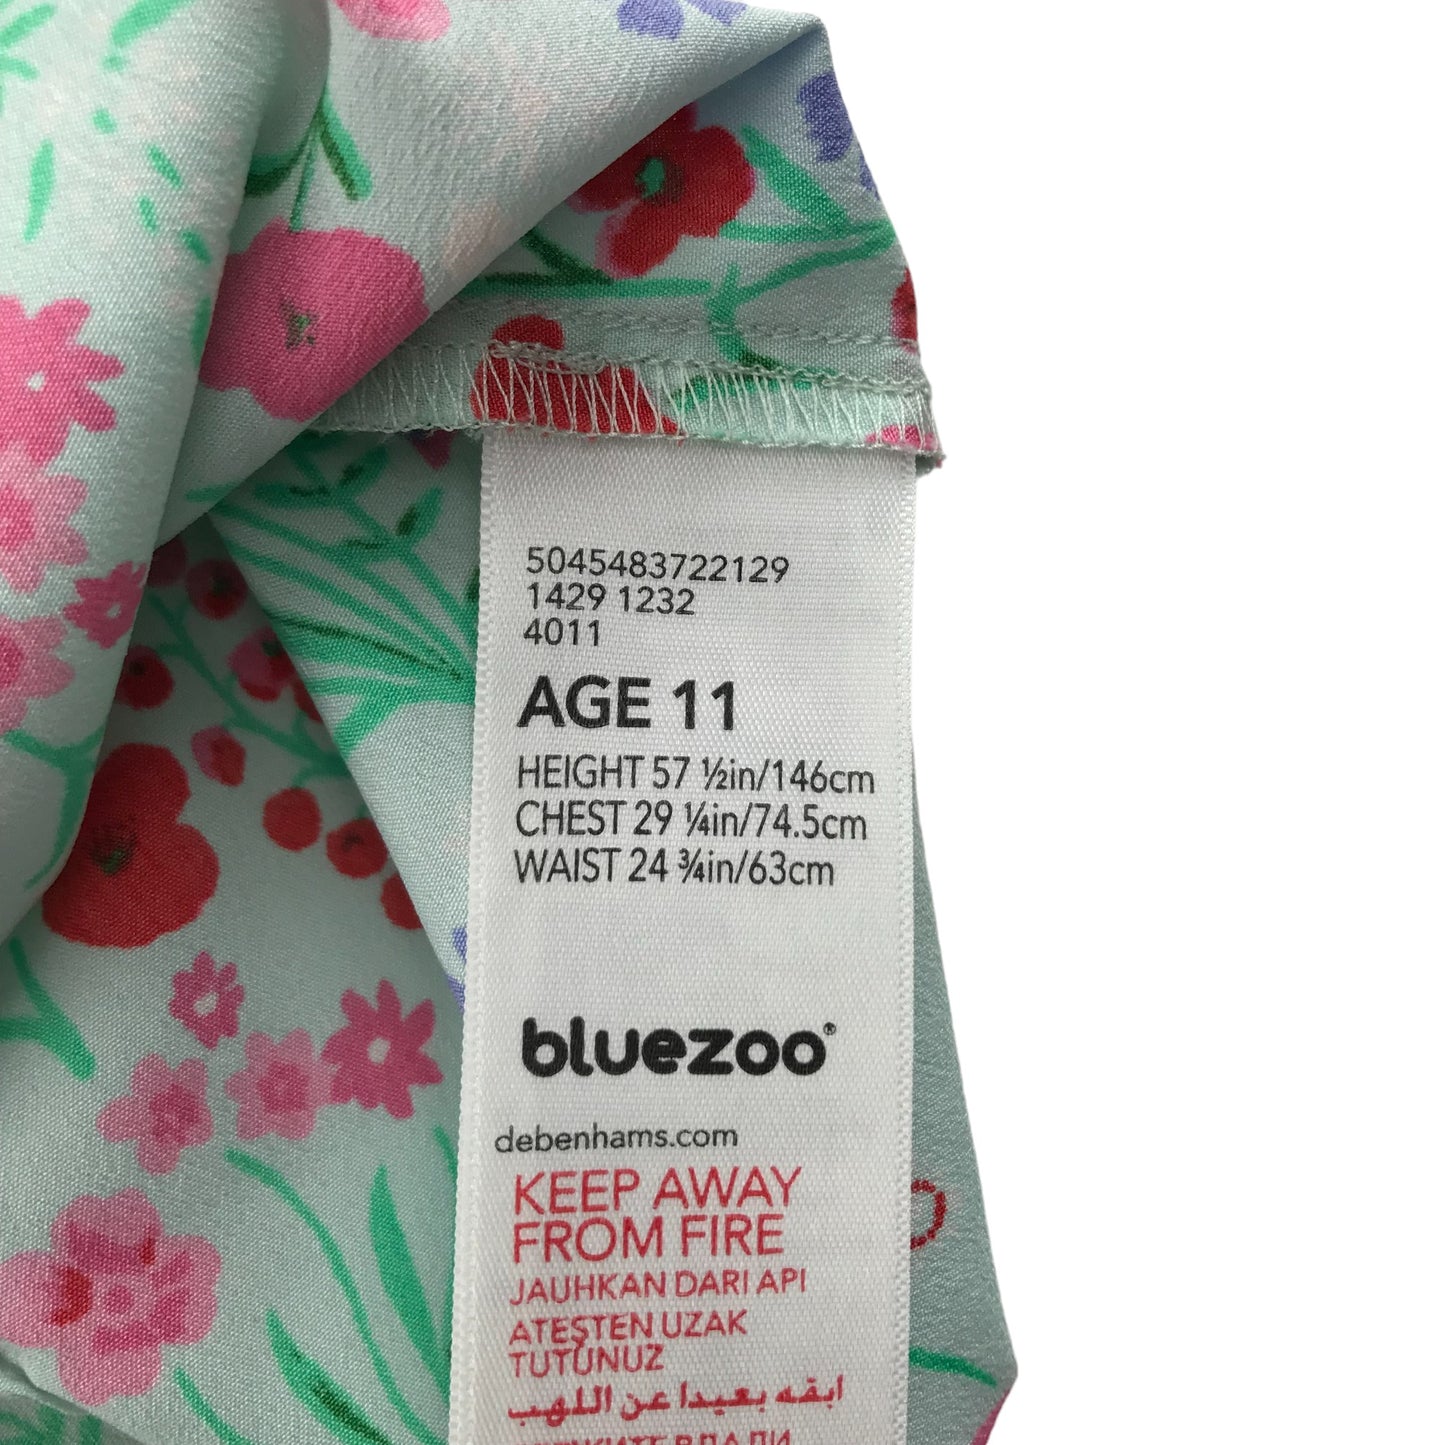 Bluezoo Top Age 11 Light Blue Floral Cropped Sleeveless Shirt Blouse